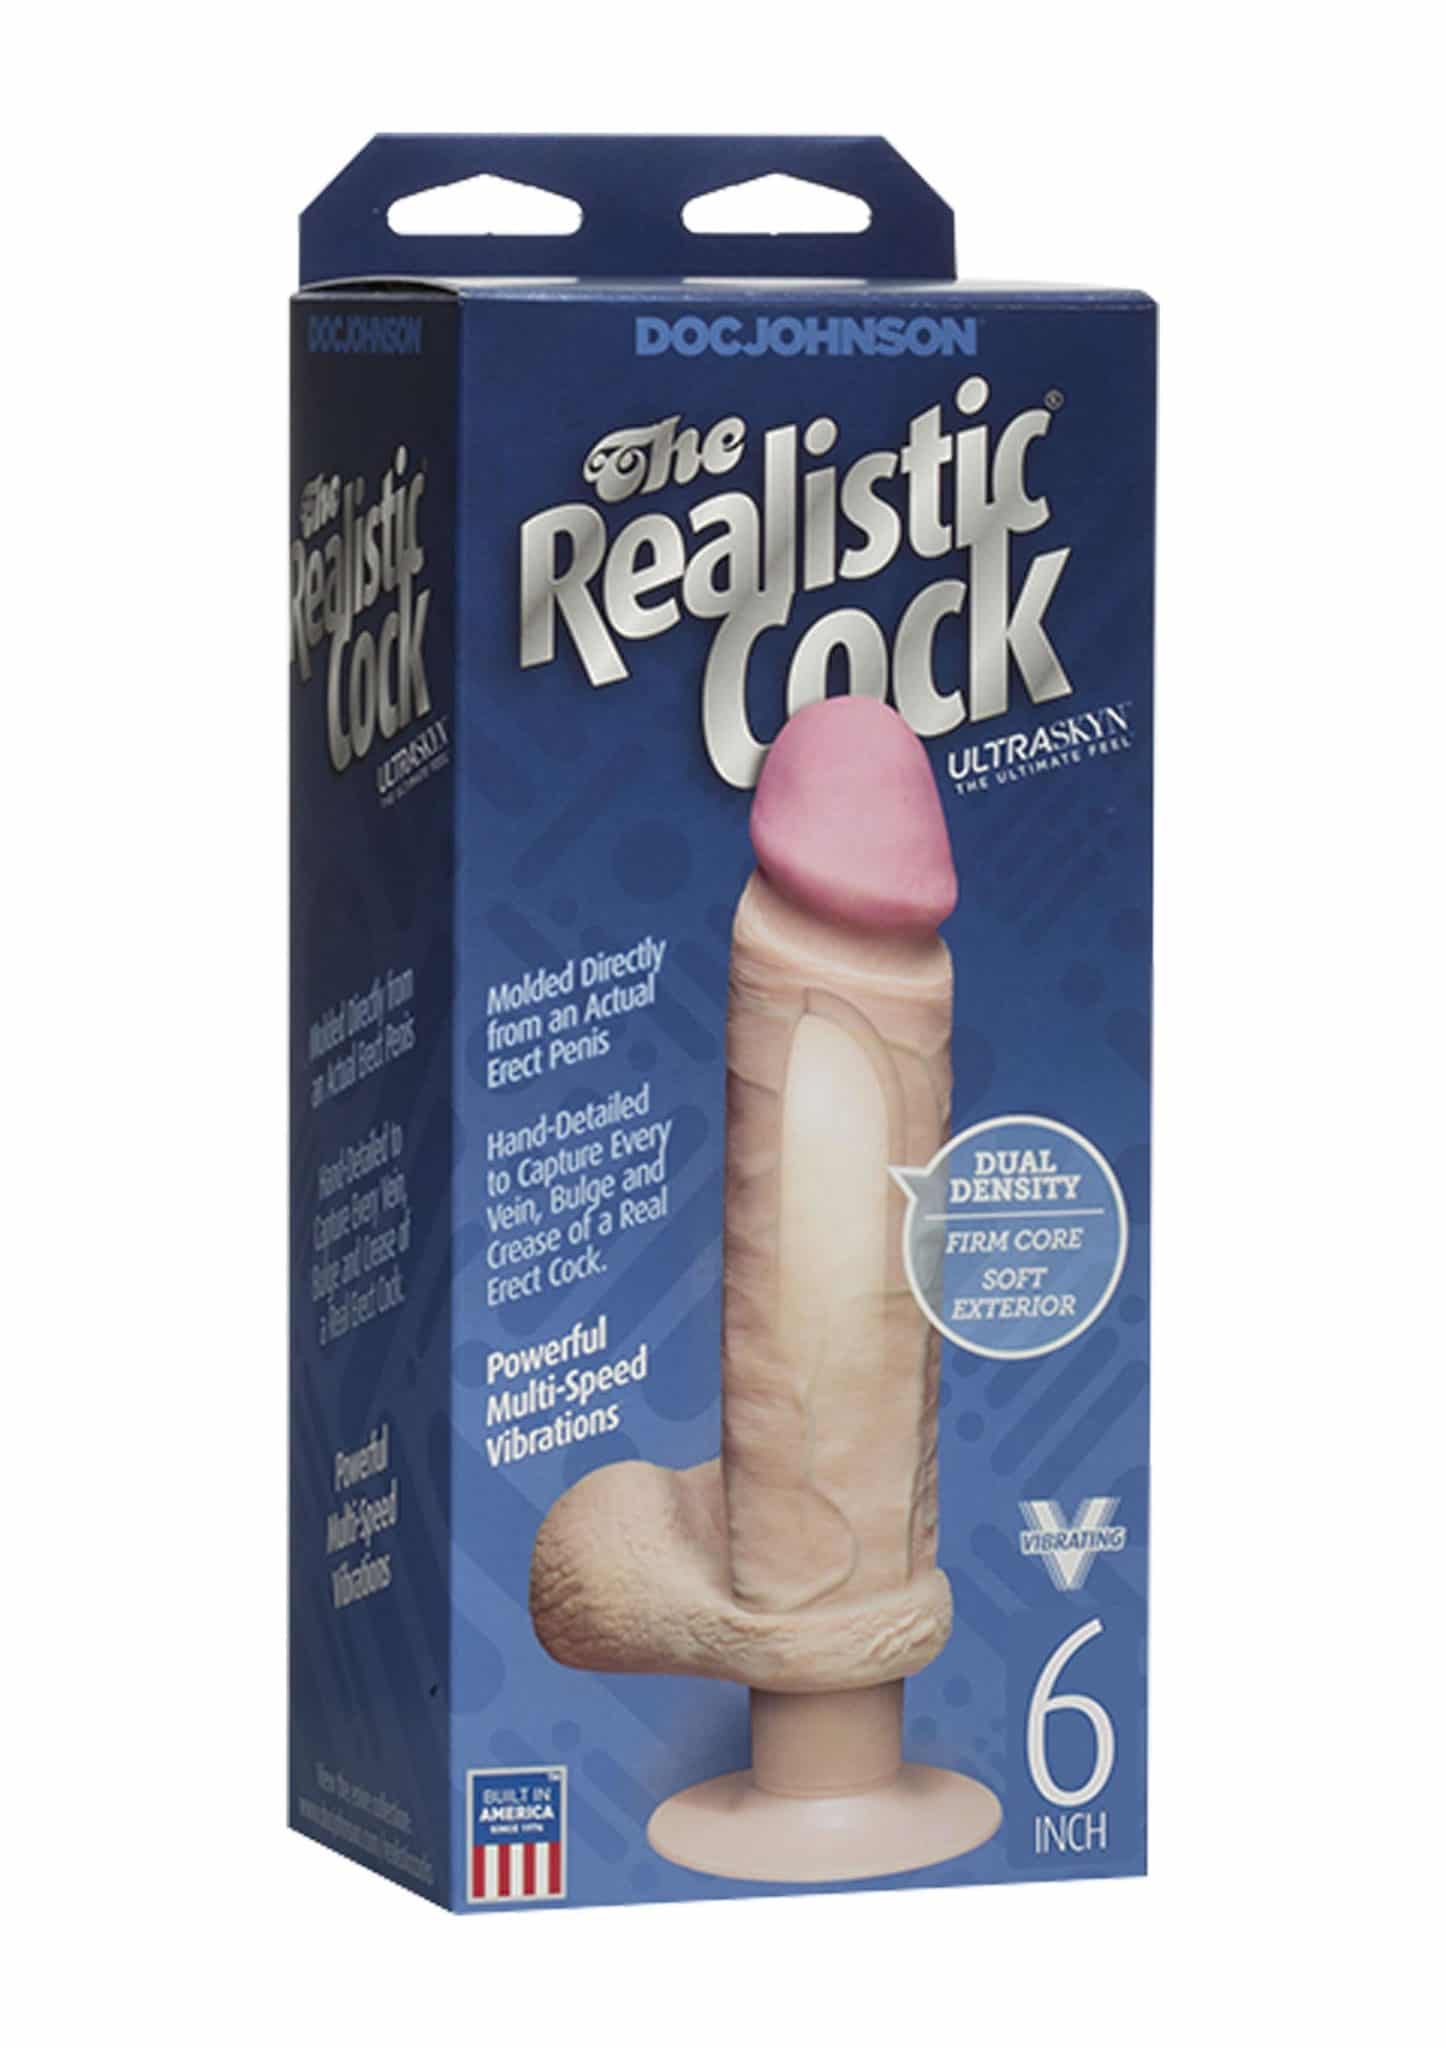 15 CM Realistic Cock Vibro packaging